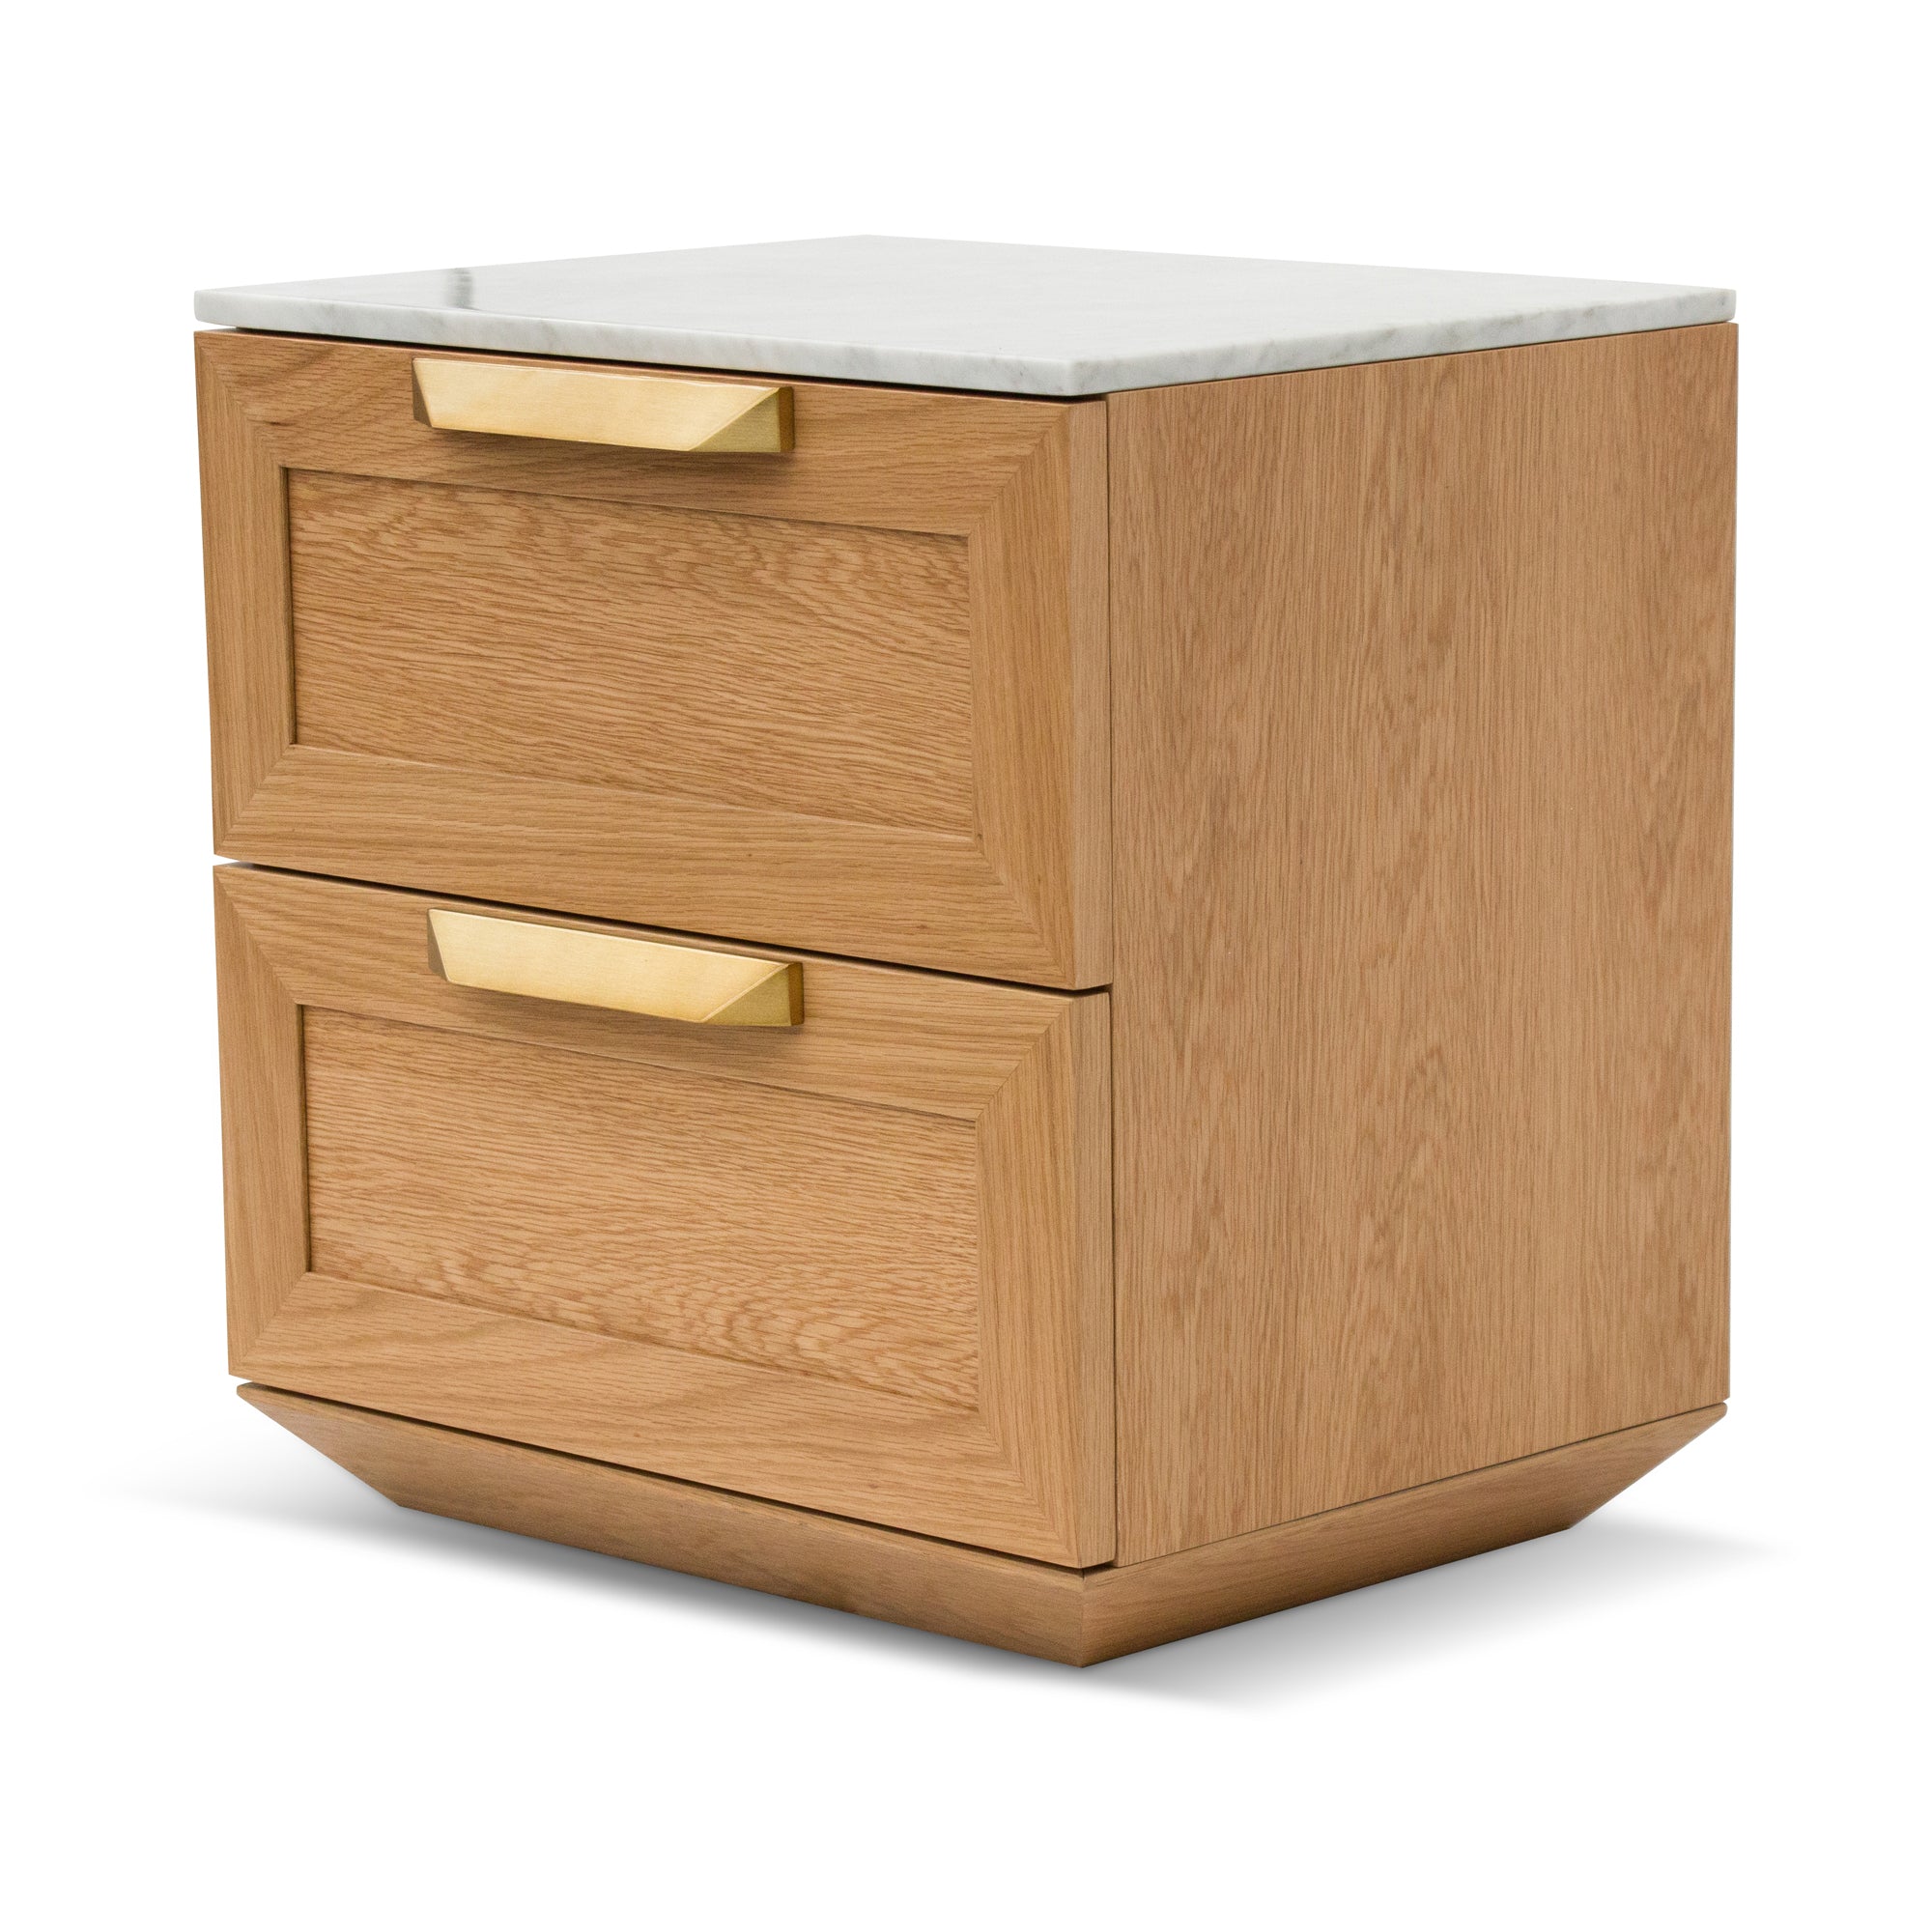 Selena Bedside Table - Natural with Marble Top - Bedside Tables